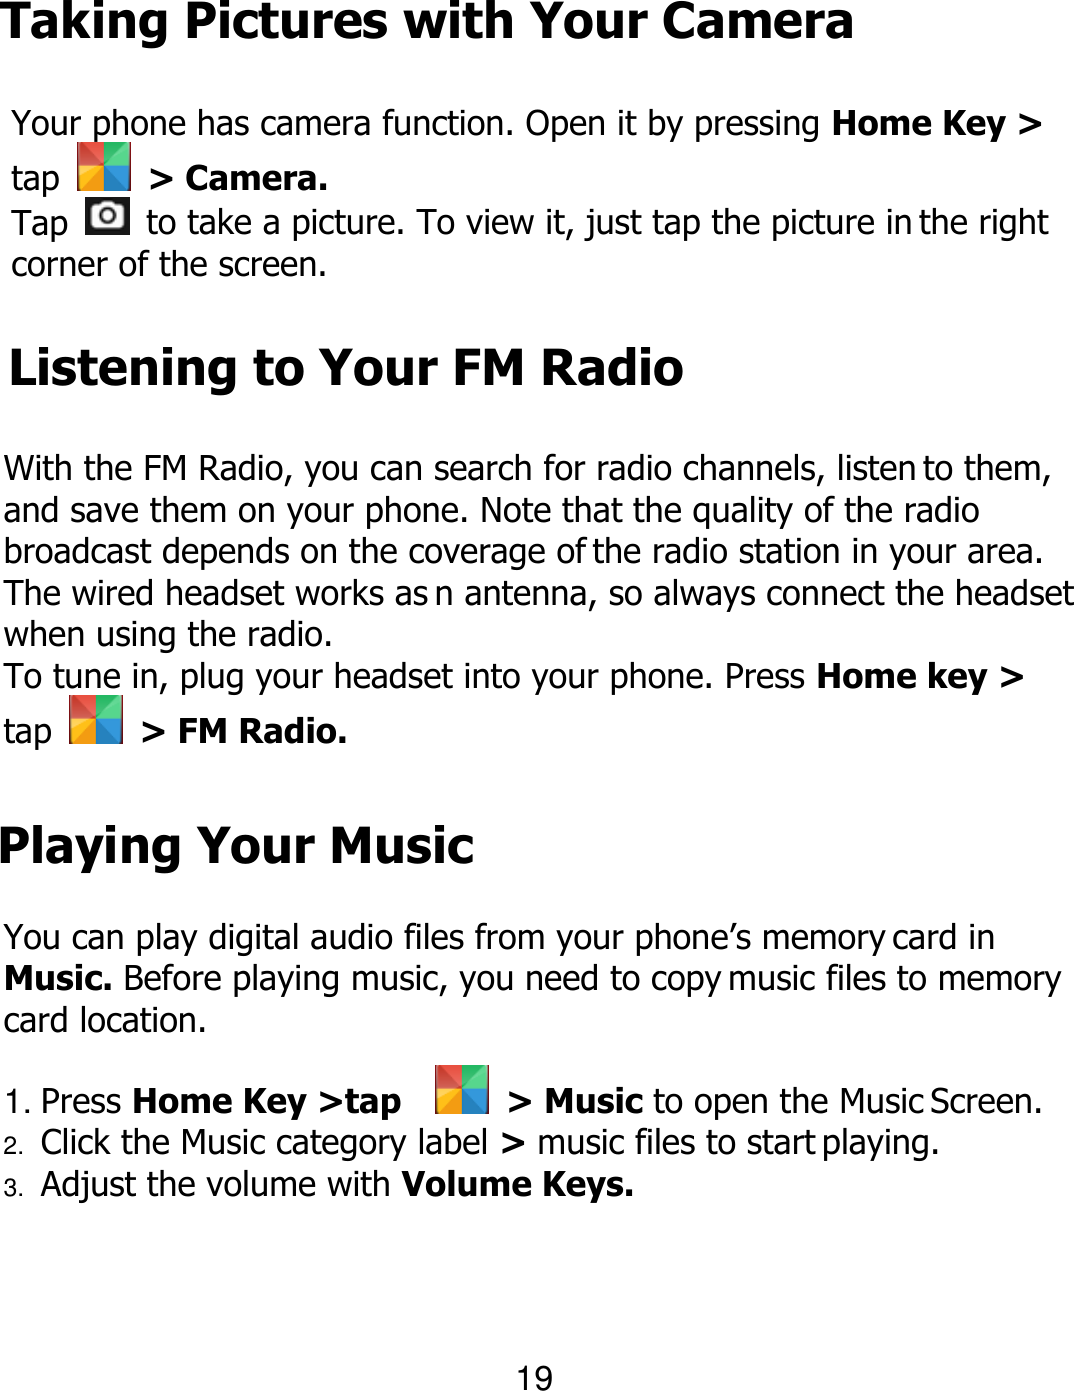 Taking Pictures with Your Camera Your phone has camera function. Open it by pressing Home Key &gt; tap    &gt; Camera. Tap    to take a picture. To view it, just tap the picture in the right corner of the screen. Listening to Your FM Radio With the FM Radio, you can search for radio channels, listen to them, and save them on your phone. Note that the quality of the radio broadcast depends on the coverage of the radio station in your area. The wired headset works as n antenna, so always connect the headset when using the radio. To tune in, plug your headset into your phone. Press Home key &gt; tap    &gt; FM Radio. 19 Playing Your Music You can play digital audio files from your phone’s memory card in Music. Before playing music, you need to copy music files to memory card location. 1. Press Home Key &gt;tap     &gt; Music to open the Music Screen. 2. Click the Music category label &gt; music files to start playing. 3. Adjust the volume with Volume Keys. 